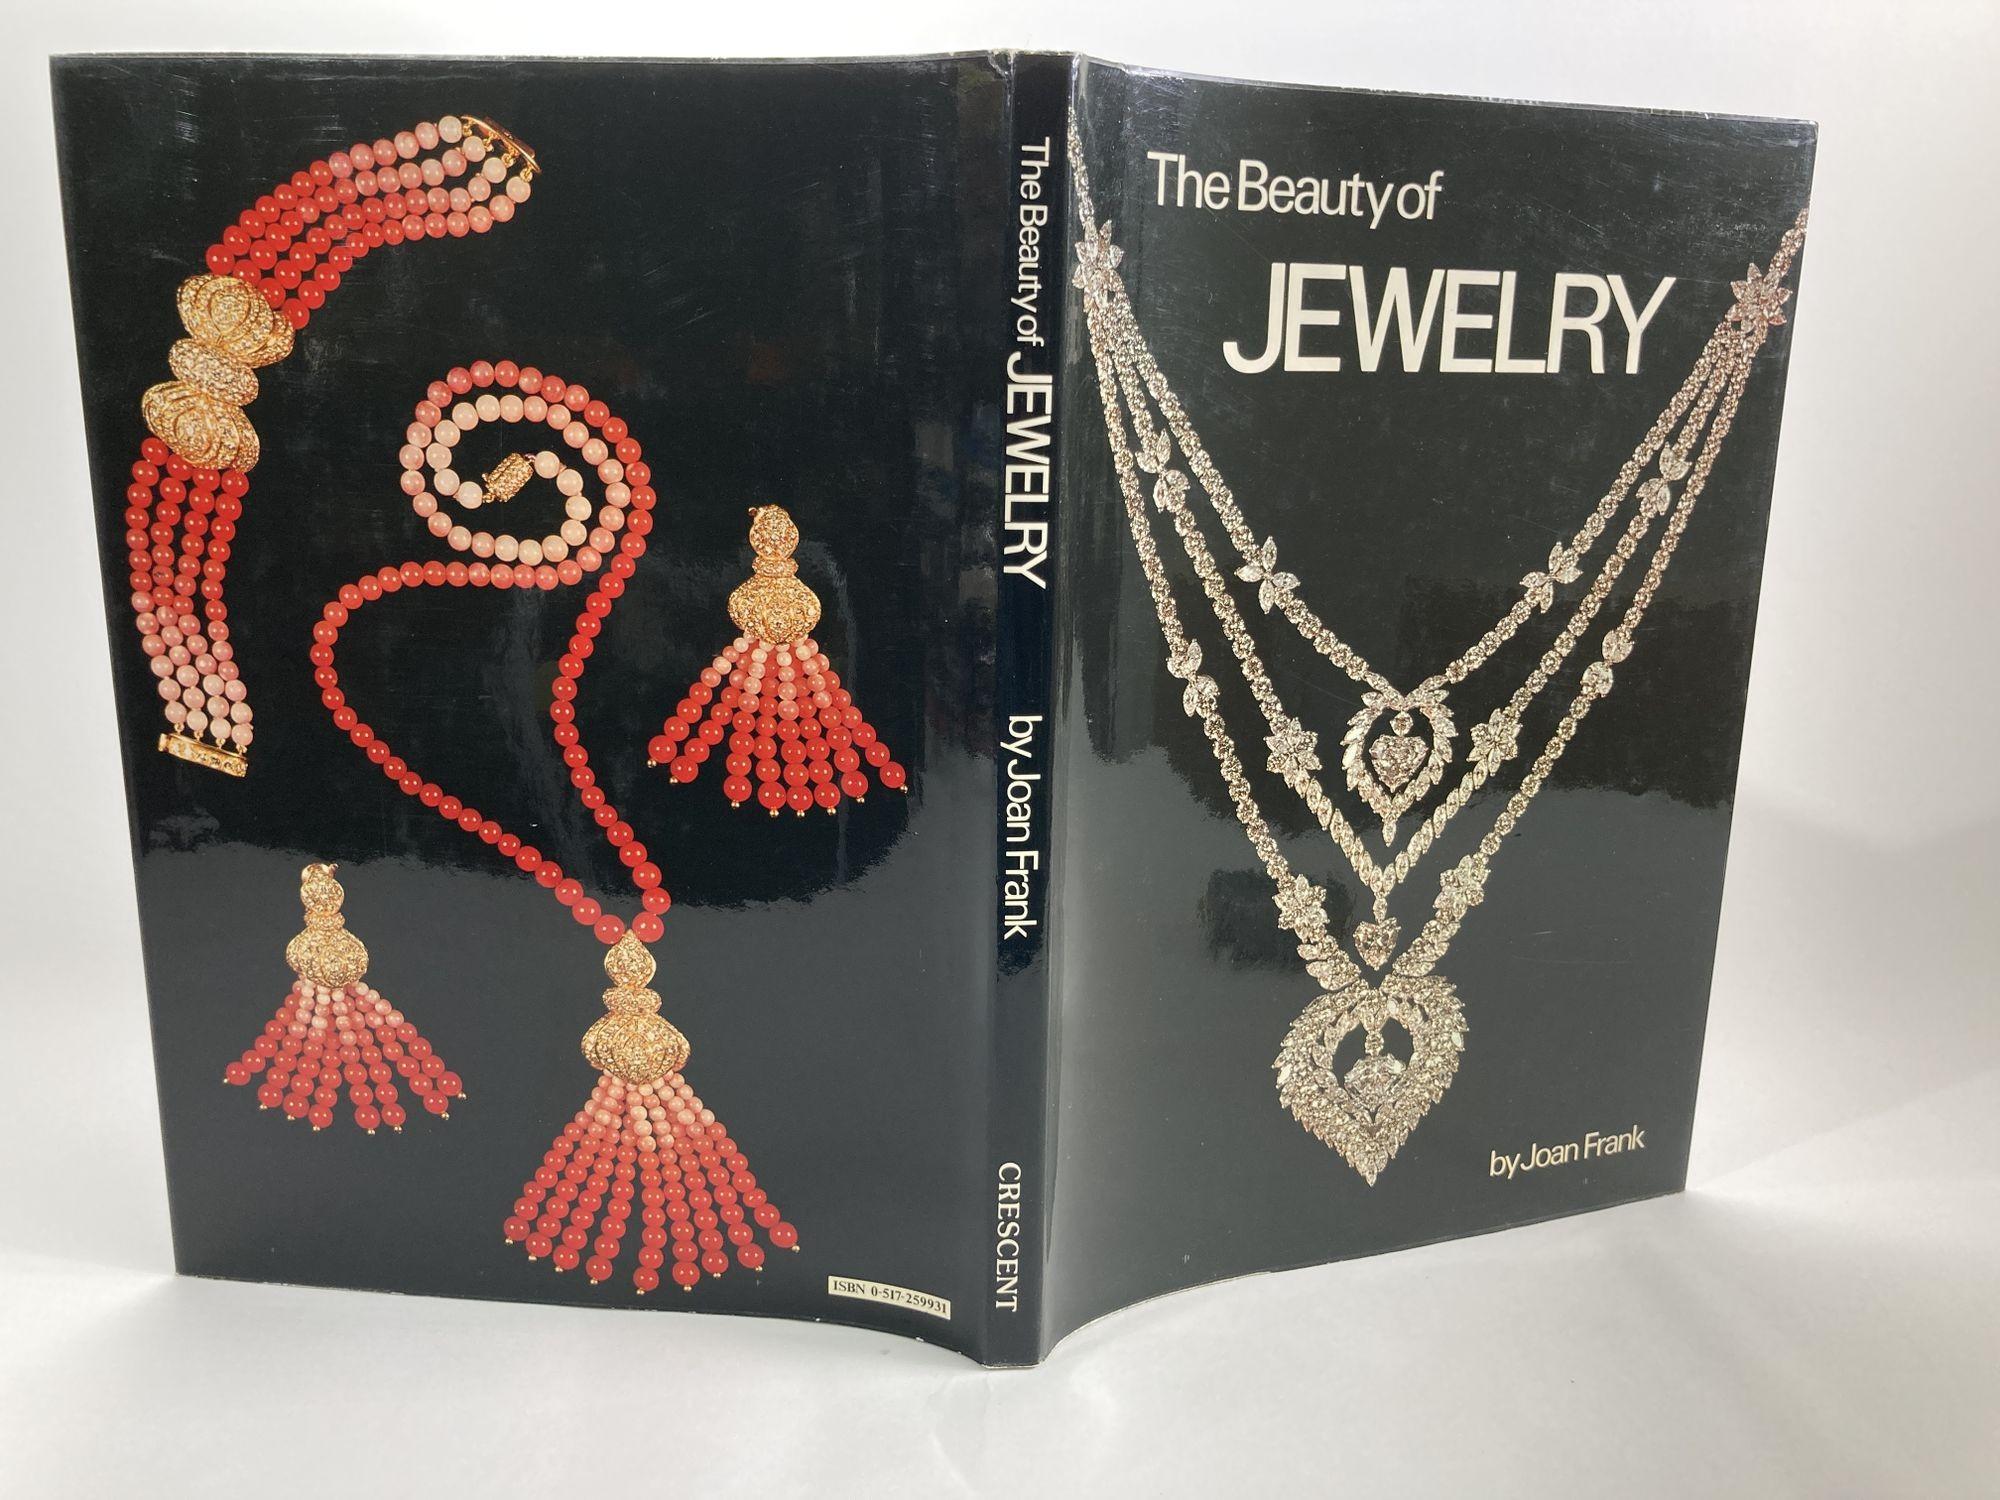 British 1979 The Beauty of Jewelry, Book by Joan Frank For Sale